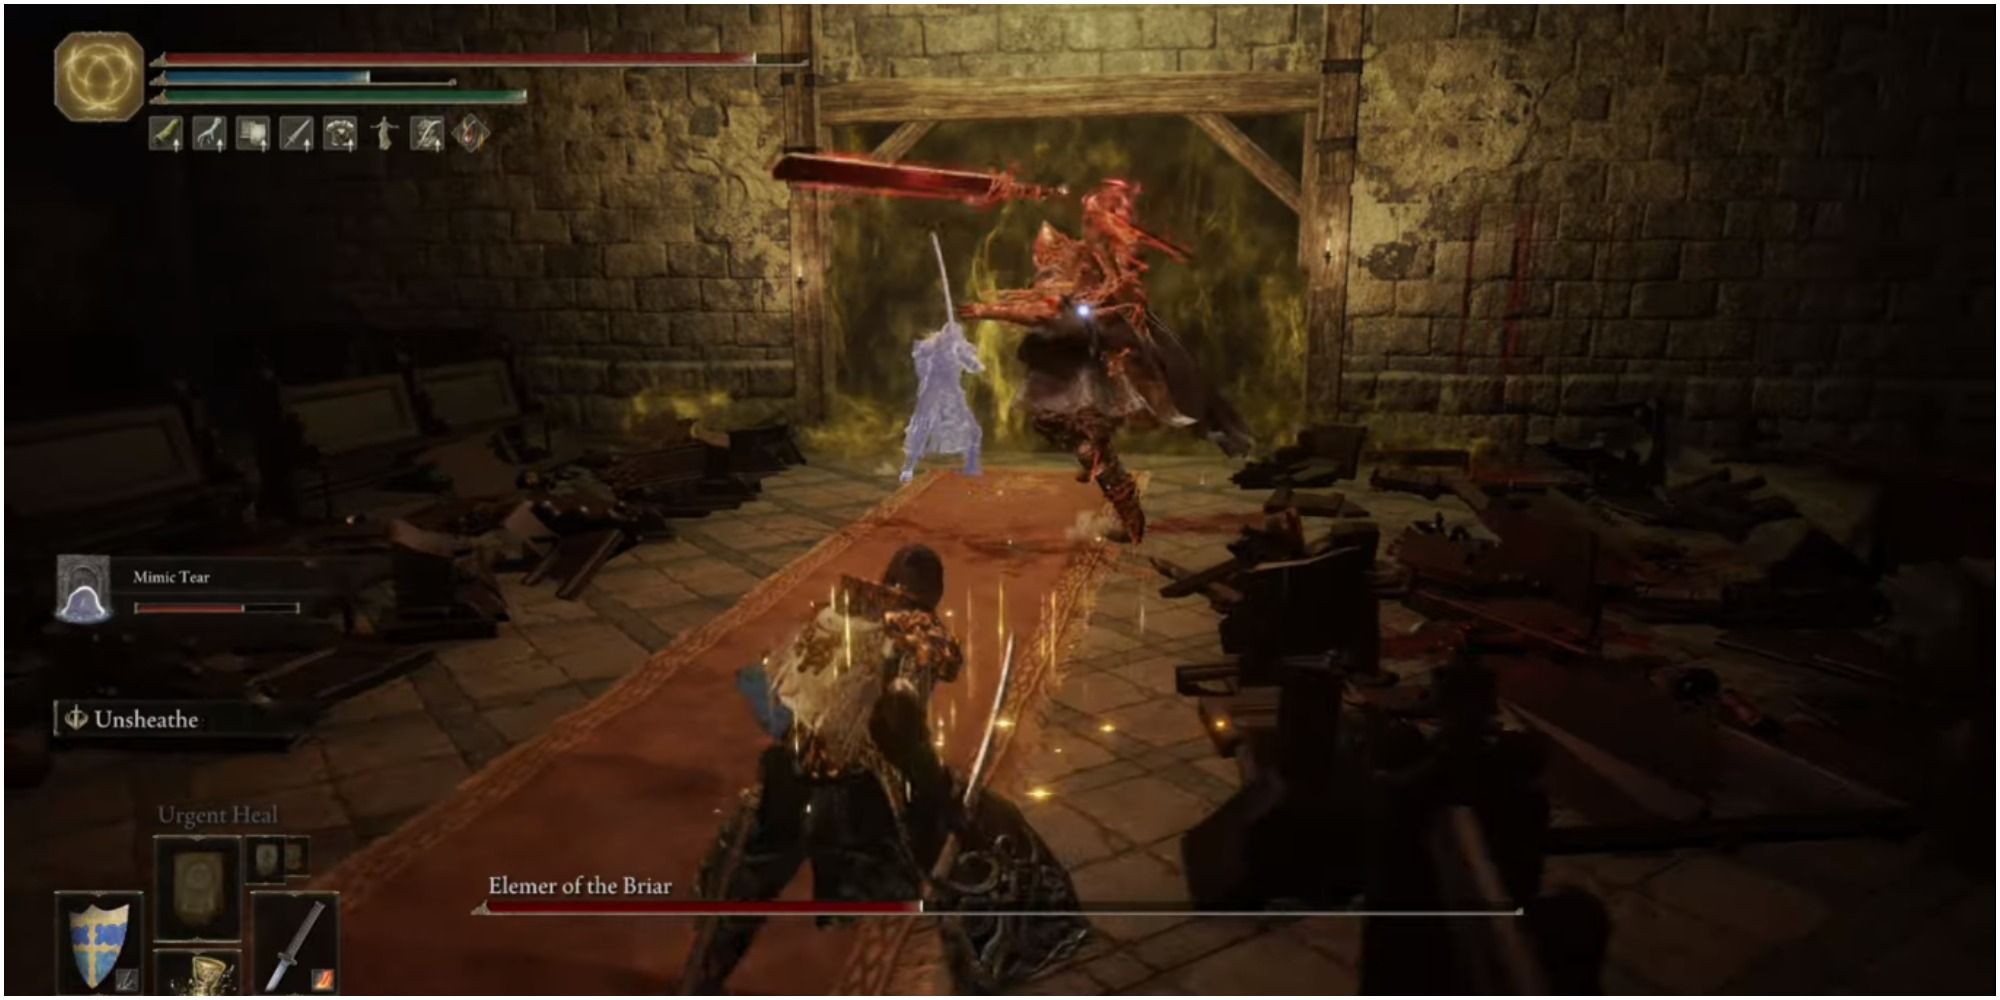 The boss throwing his sword at the player.